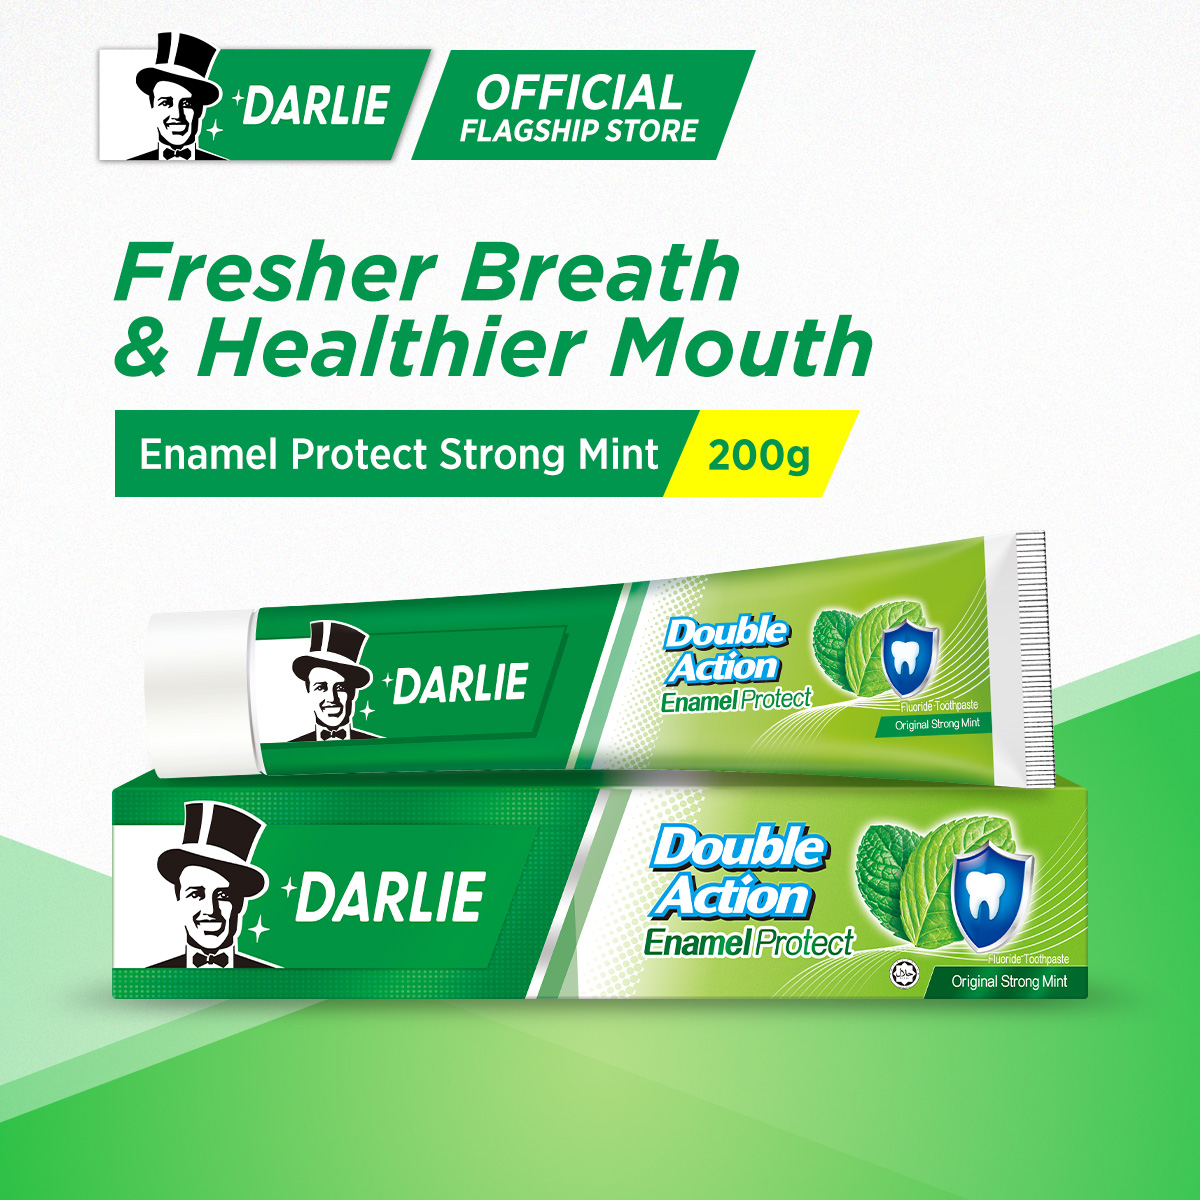 Darlie Double Action Enamel Protect Toothpaste Original Strong Mint 200g